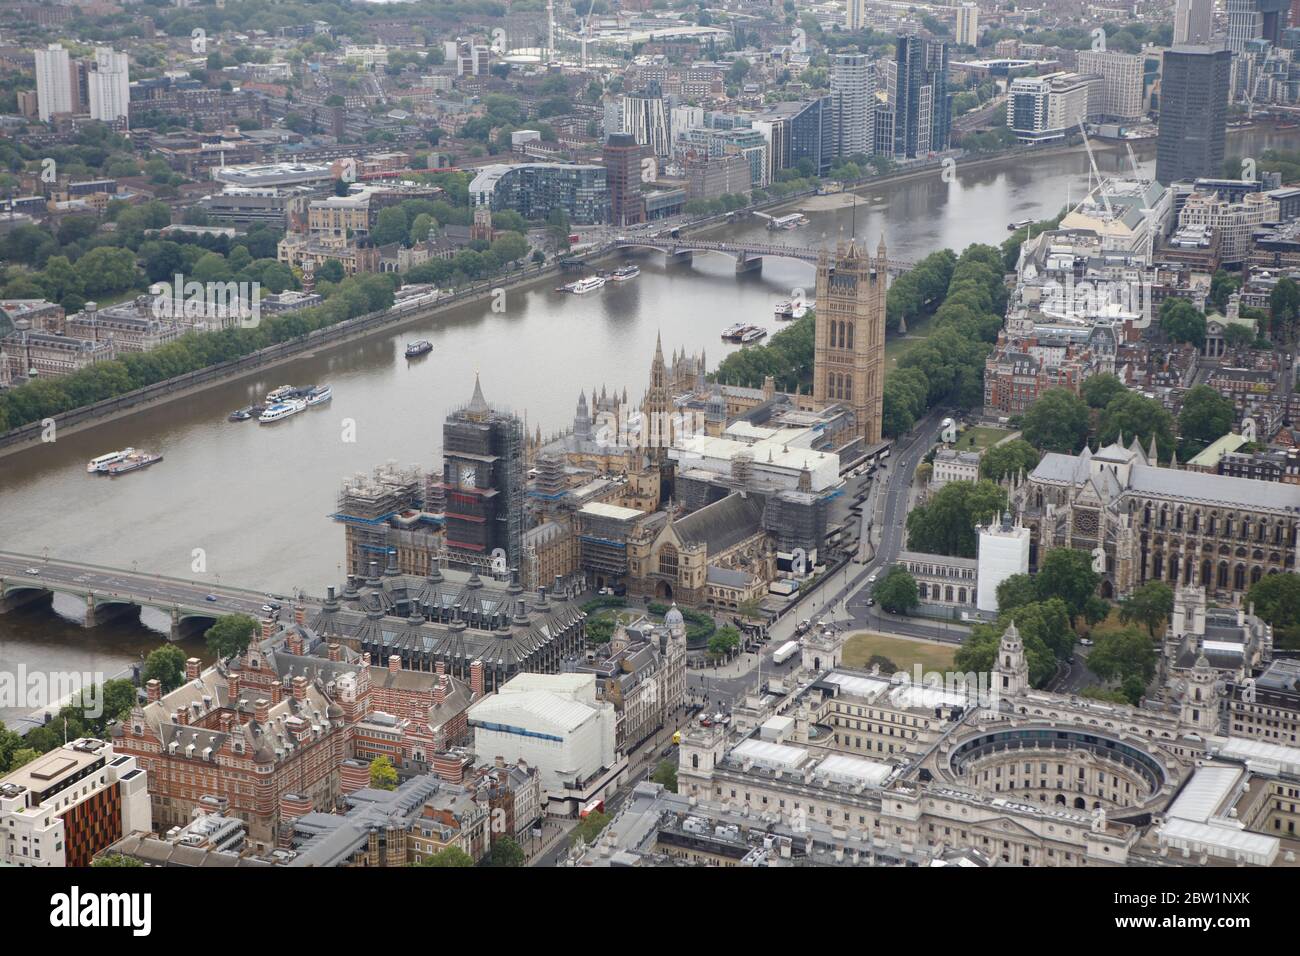 Aerial View of Parliament and Westminster, London, UK Stock Photo